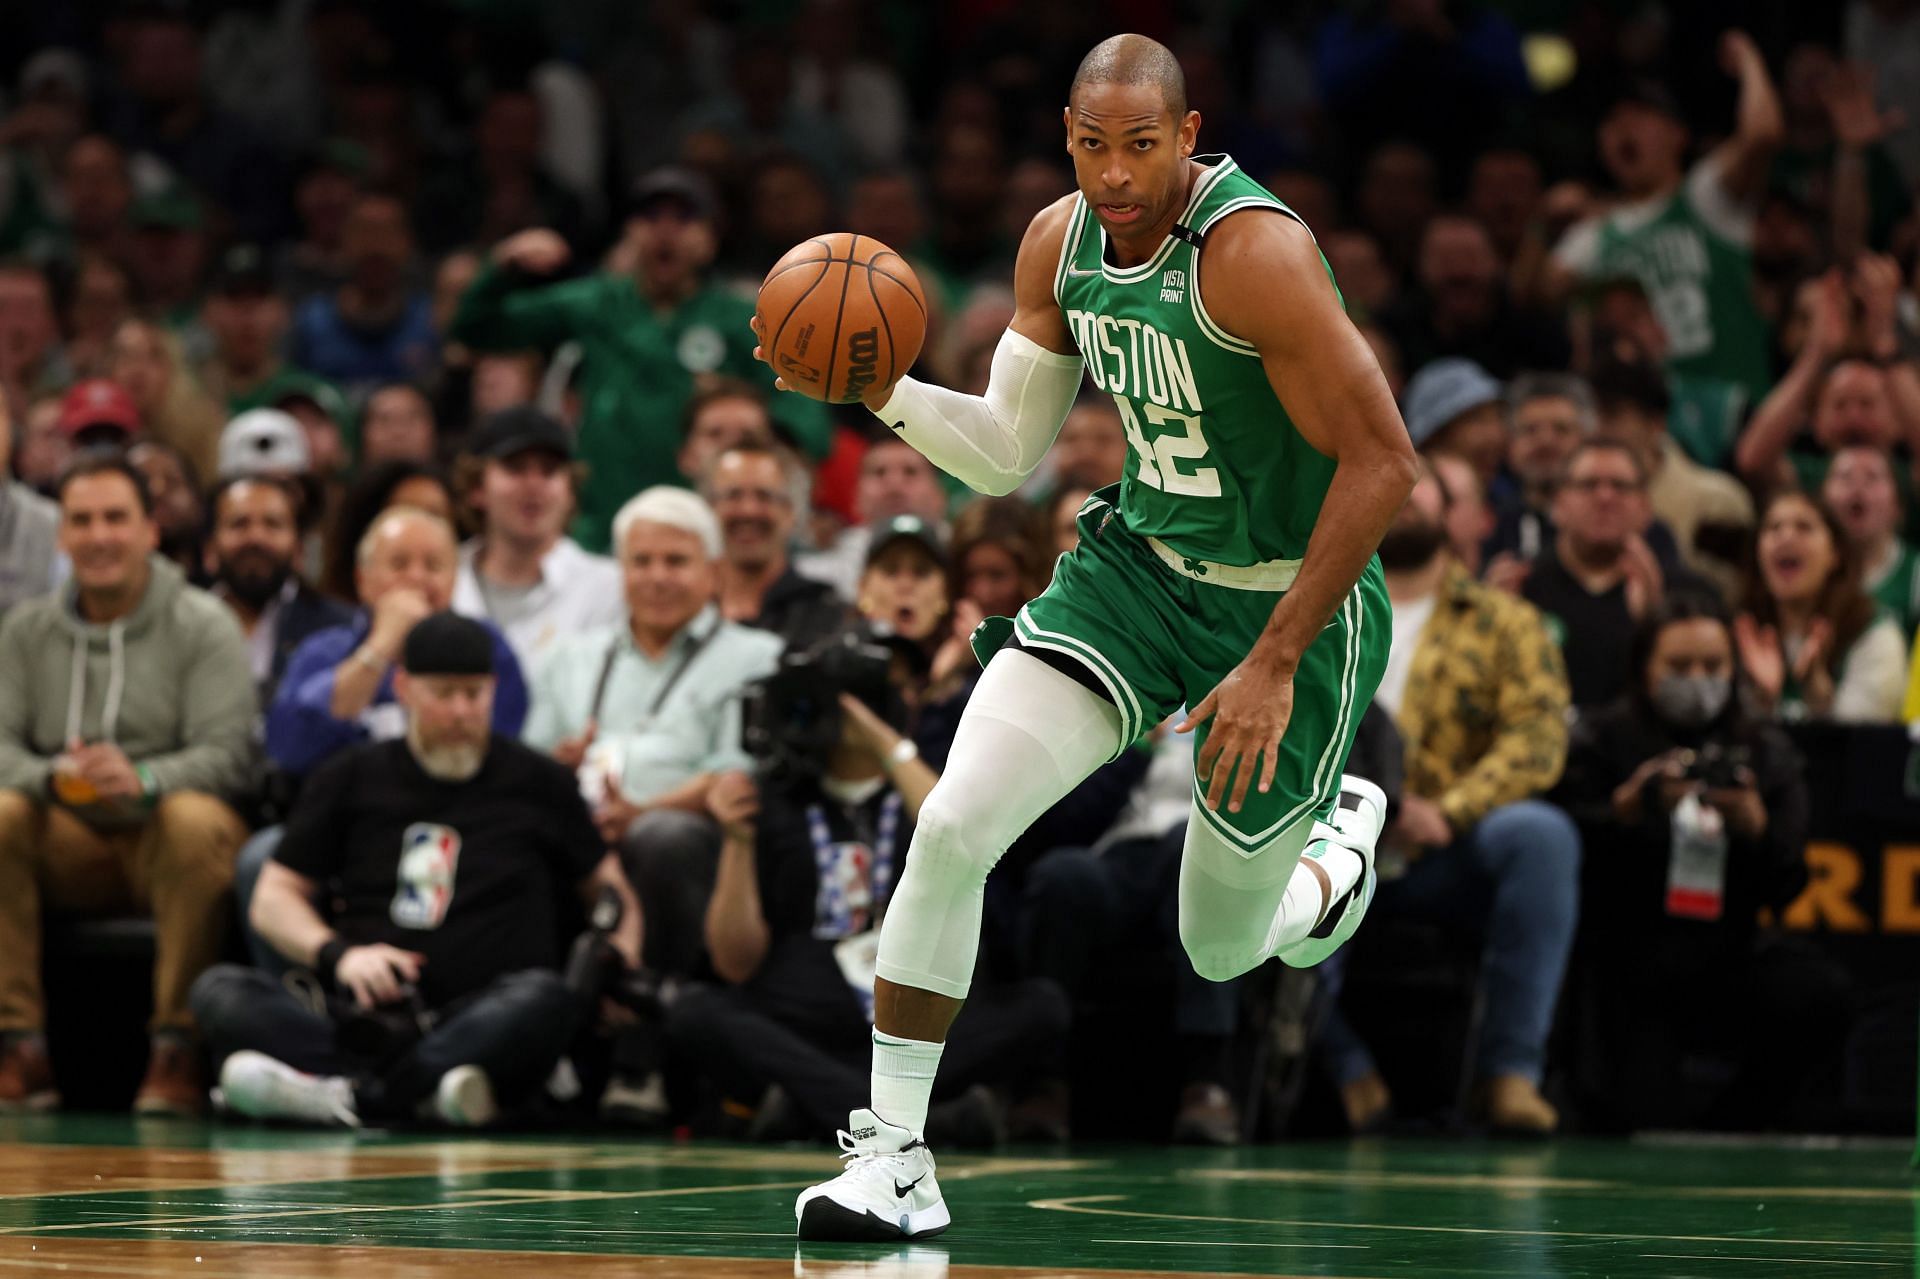 Al Horford was milliseconds away from sending the game into overtime on Saturday.